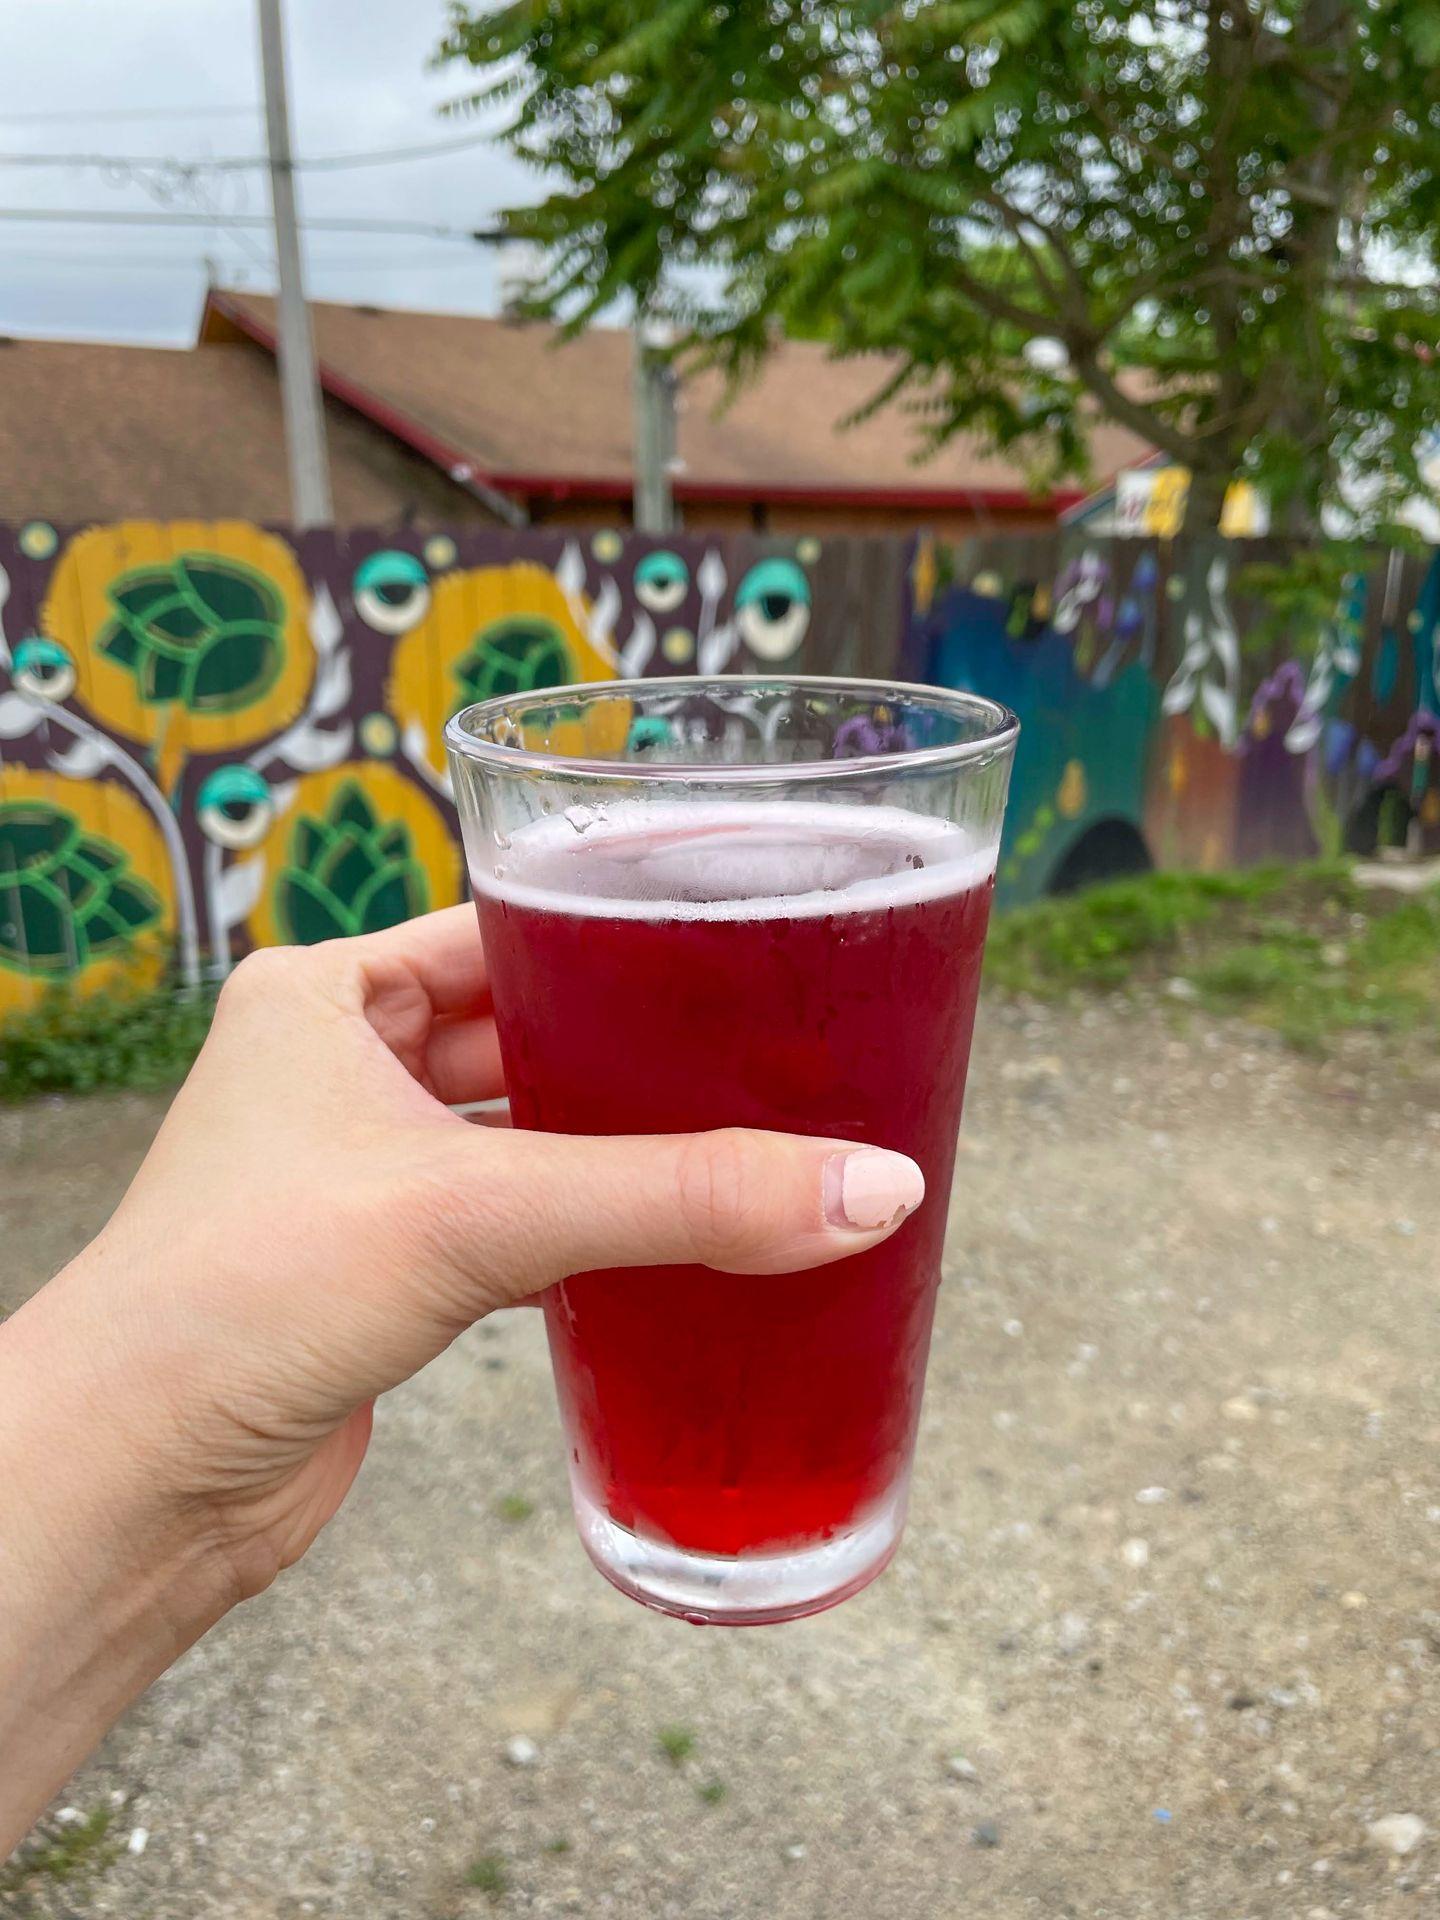 Holding up a beer on the patio of Trail Town Brewing. The background is a colorful fence painted with murals.